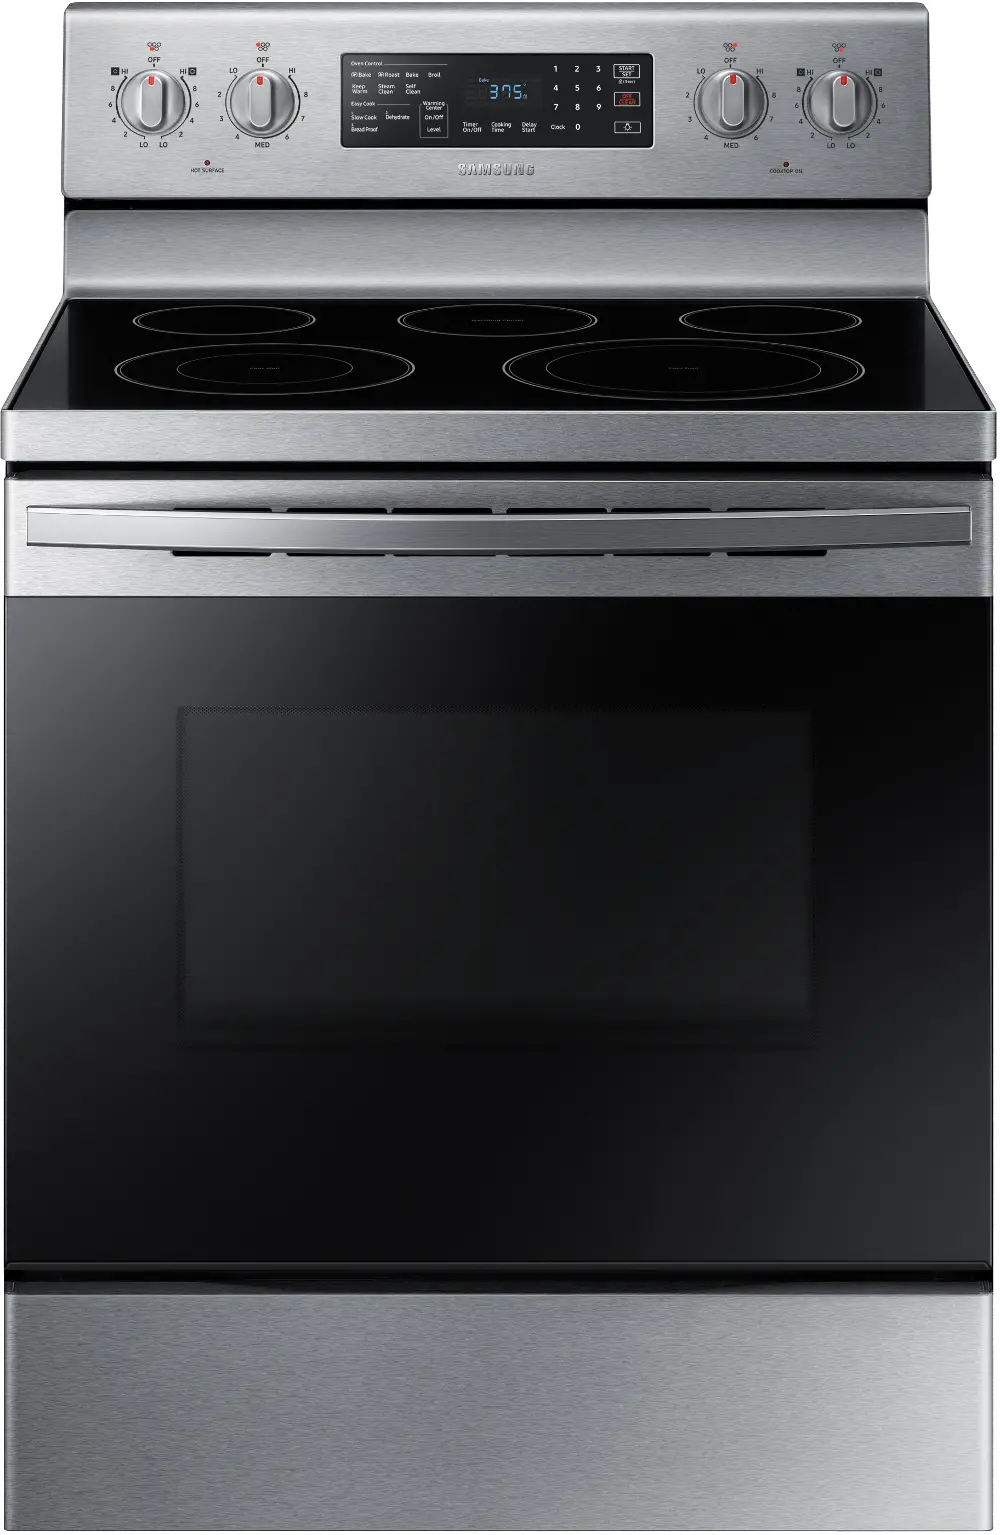 NE59R4321SS Samsung 30 Inch Electric Convection Range - 5.9 cu. ft. Stainless Steel-1